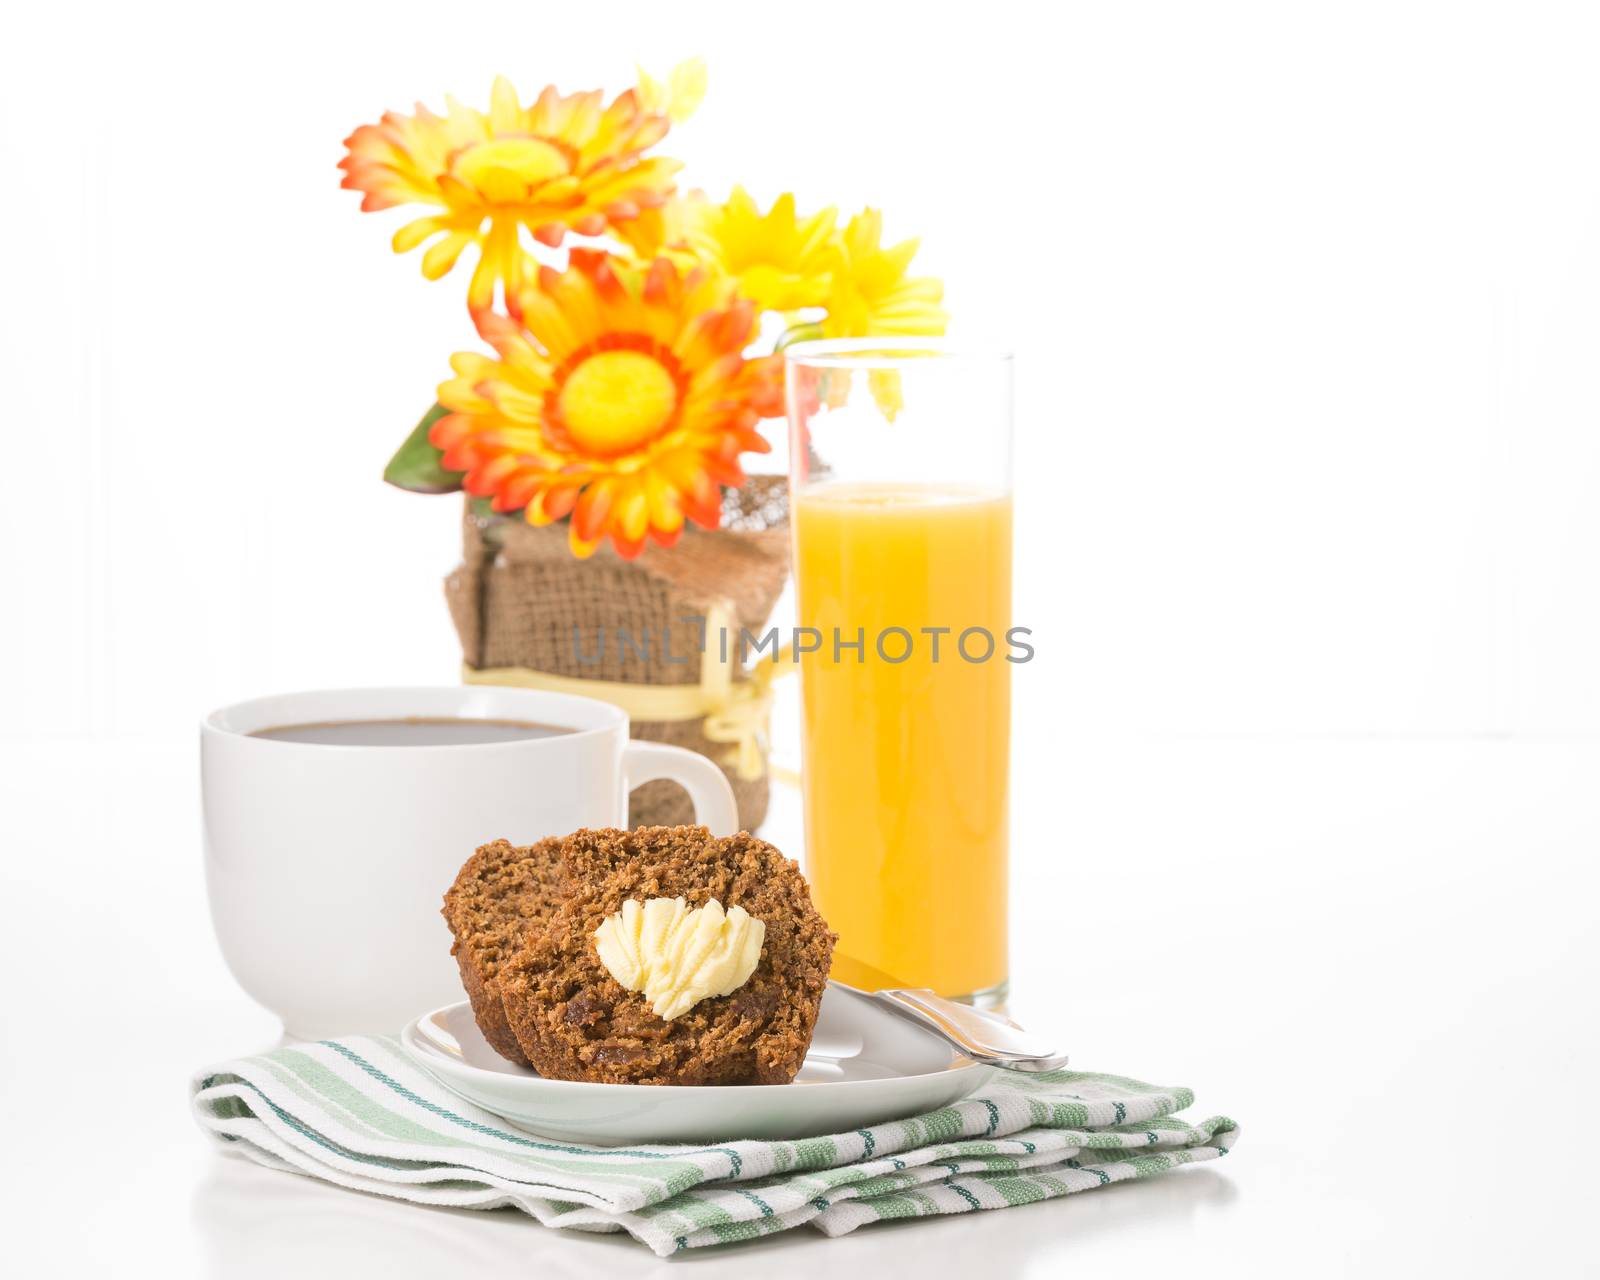 Fresh bran muffin served with coffee and orange juice.